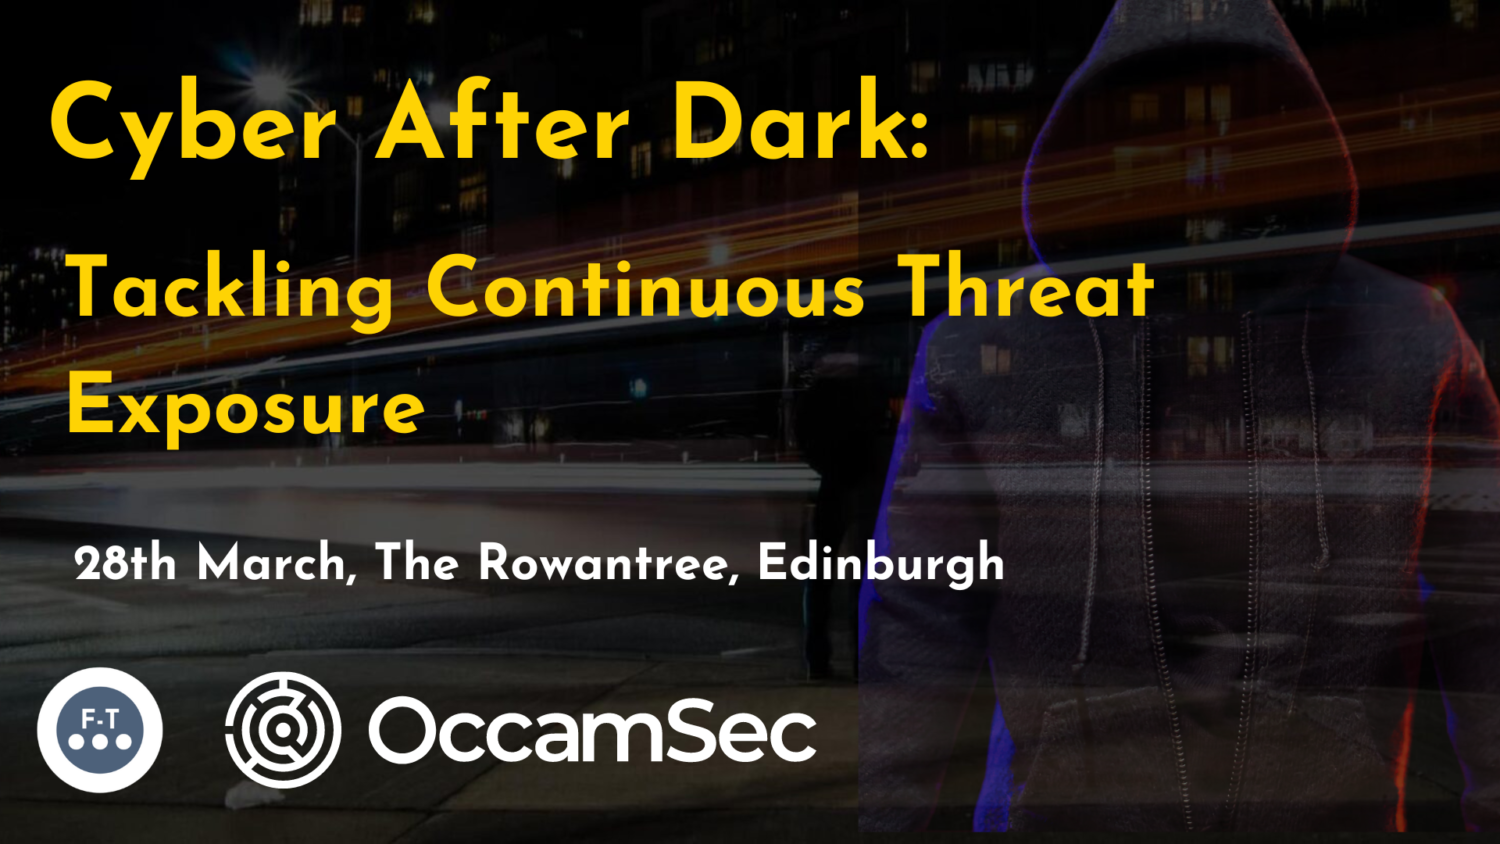 Cyber After Dark: Tackling Continuous Threat Exposure